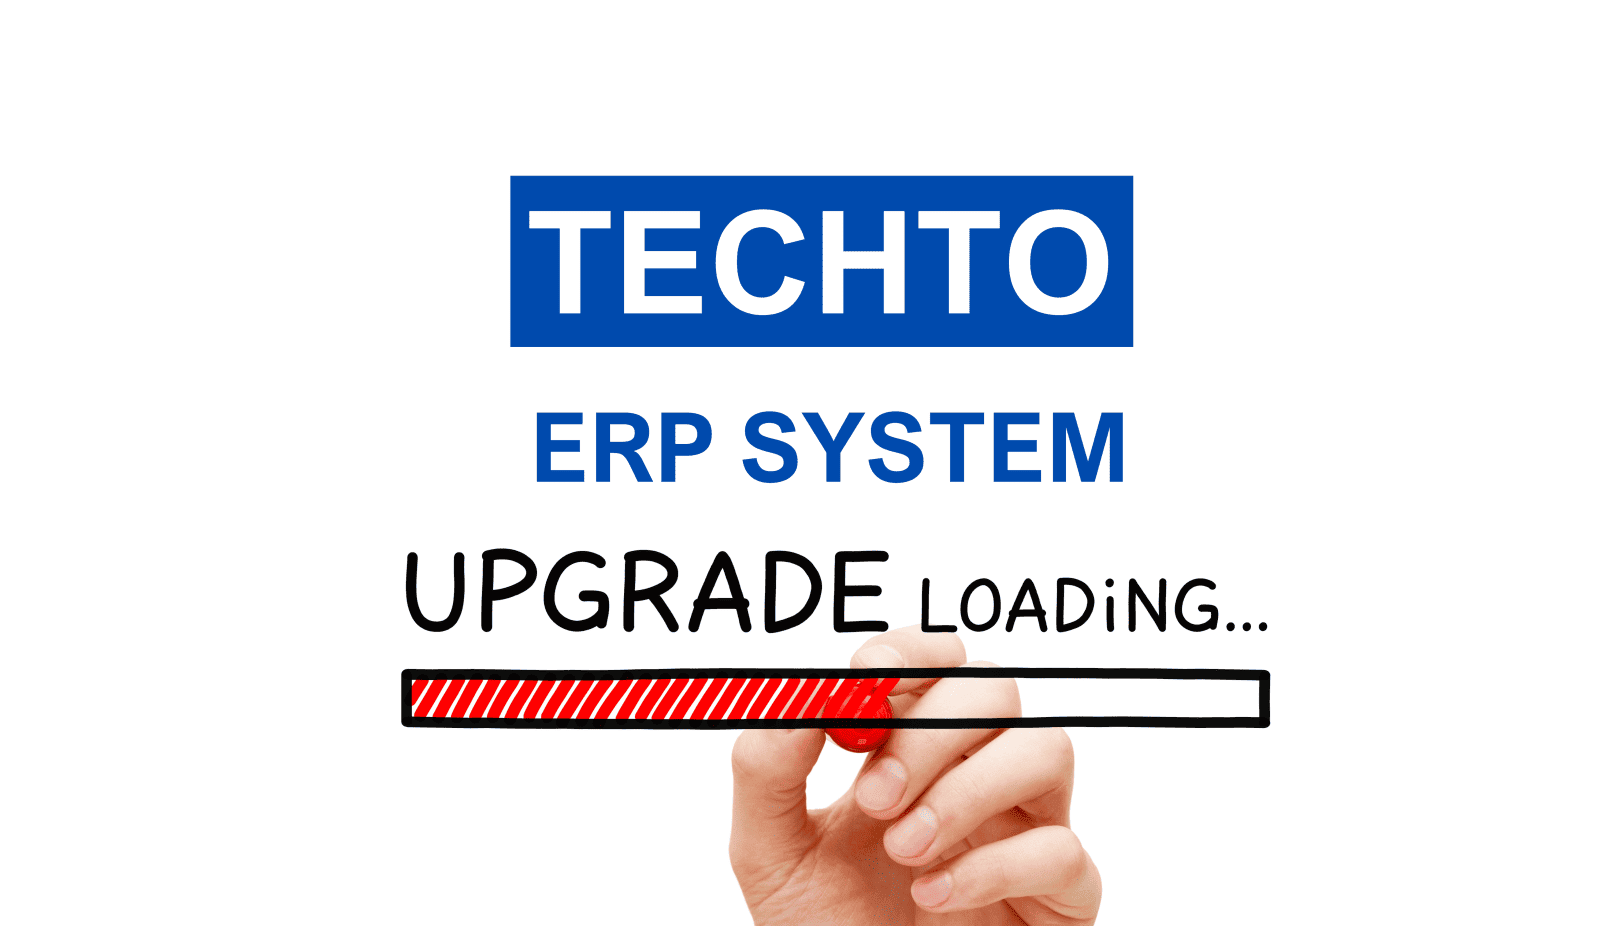 TECHTO’s scheduled ERP system upgrade is going according to plan